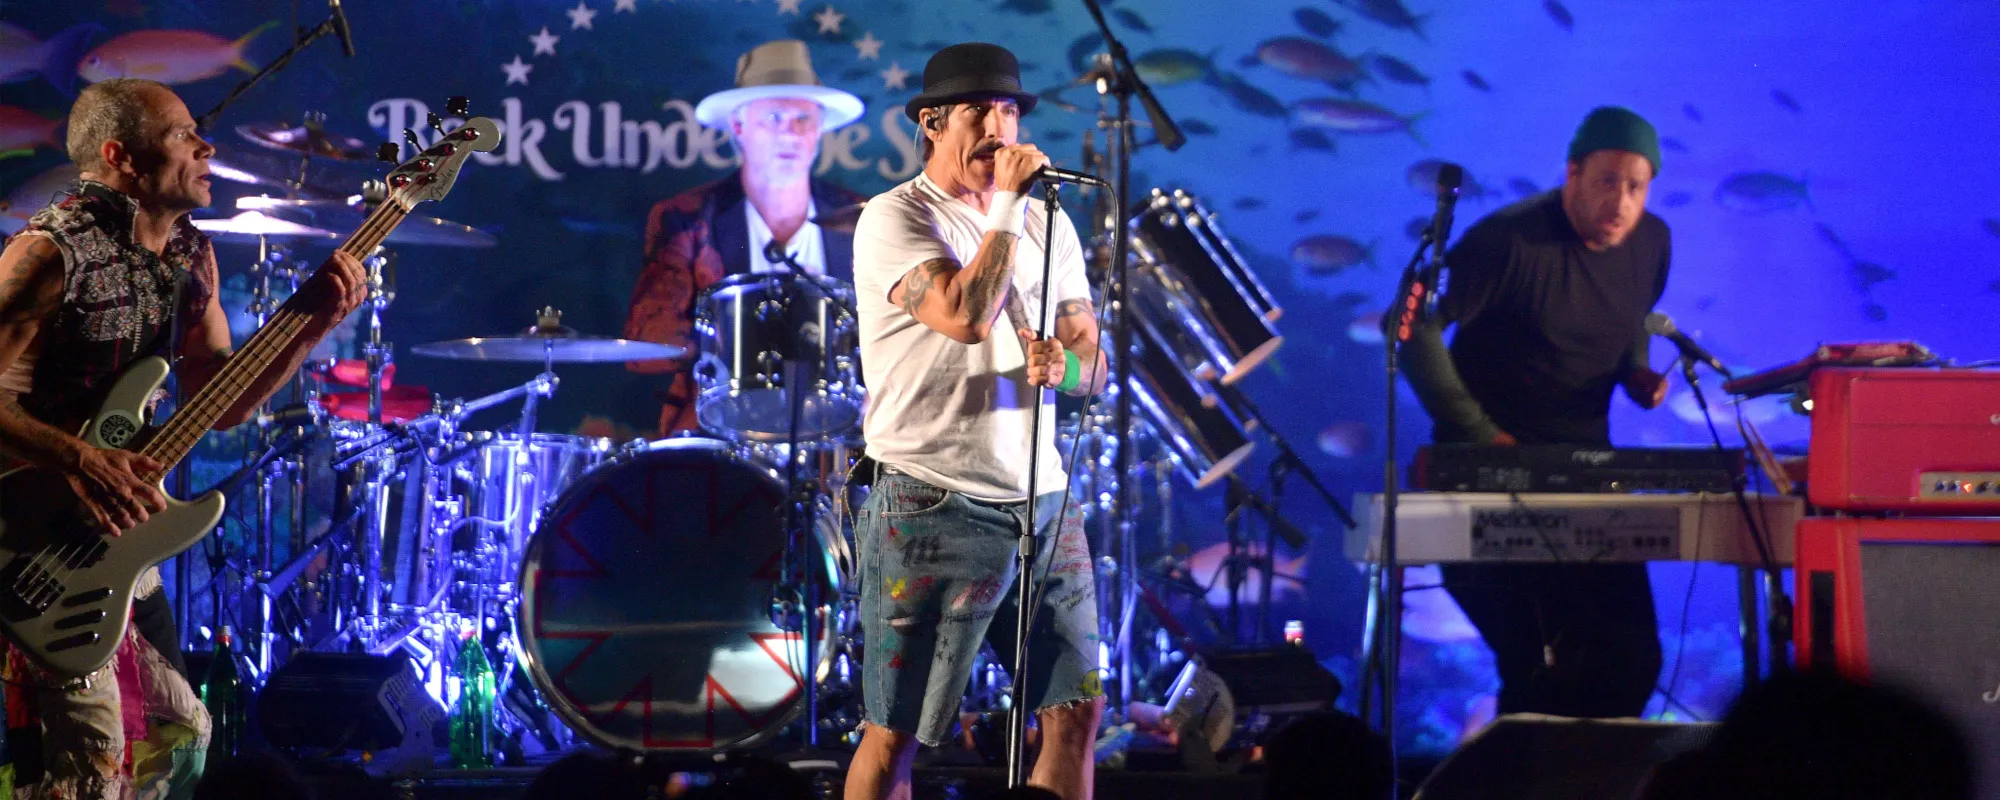 Red Hot Chili Peppers Cover Nirvana’s “Smells Like Teen Spirit”